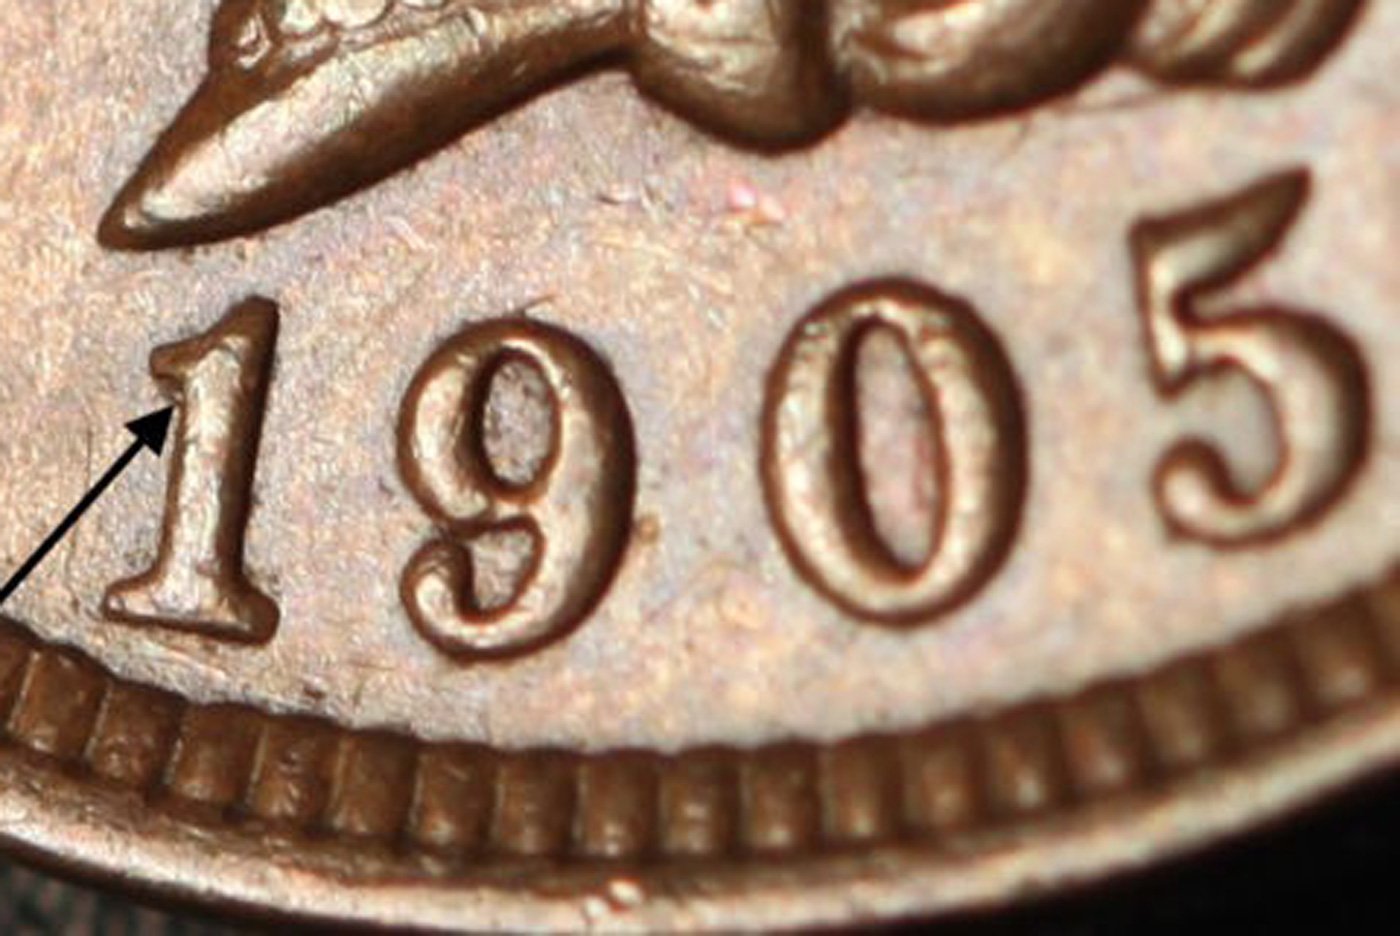 1905 RPD-016 - Indian Head Penny - Photo by Ed Nathanson